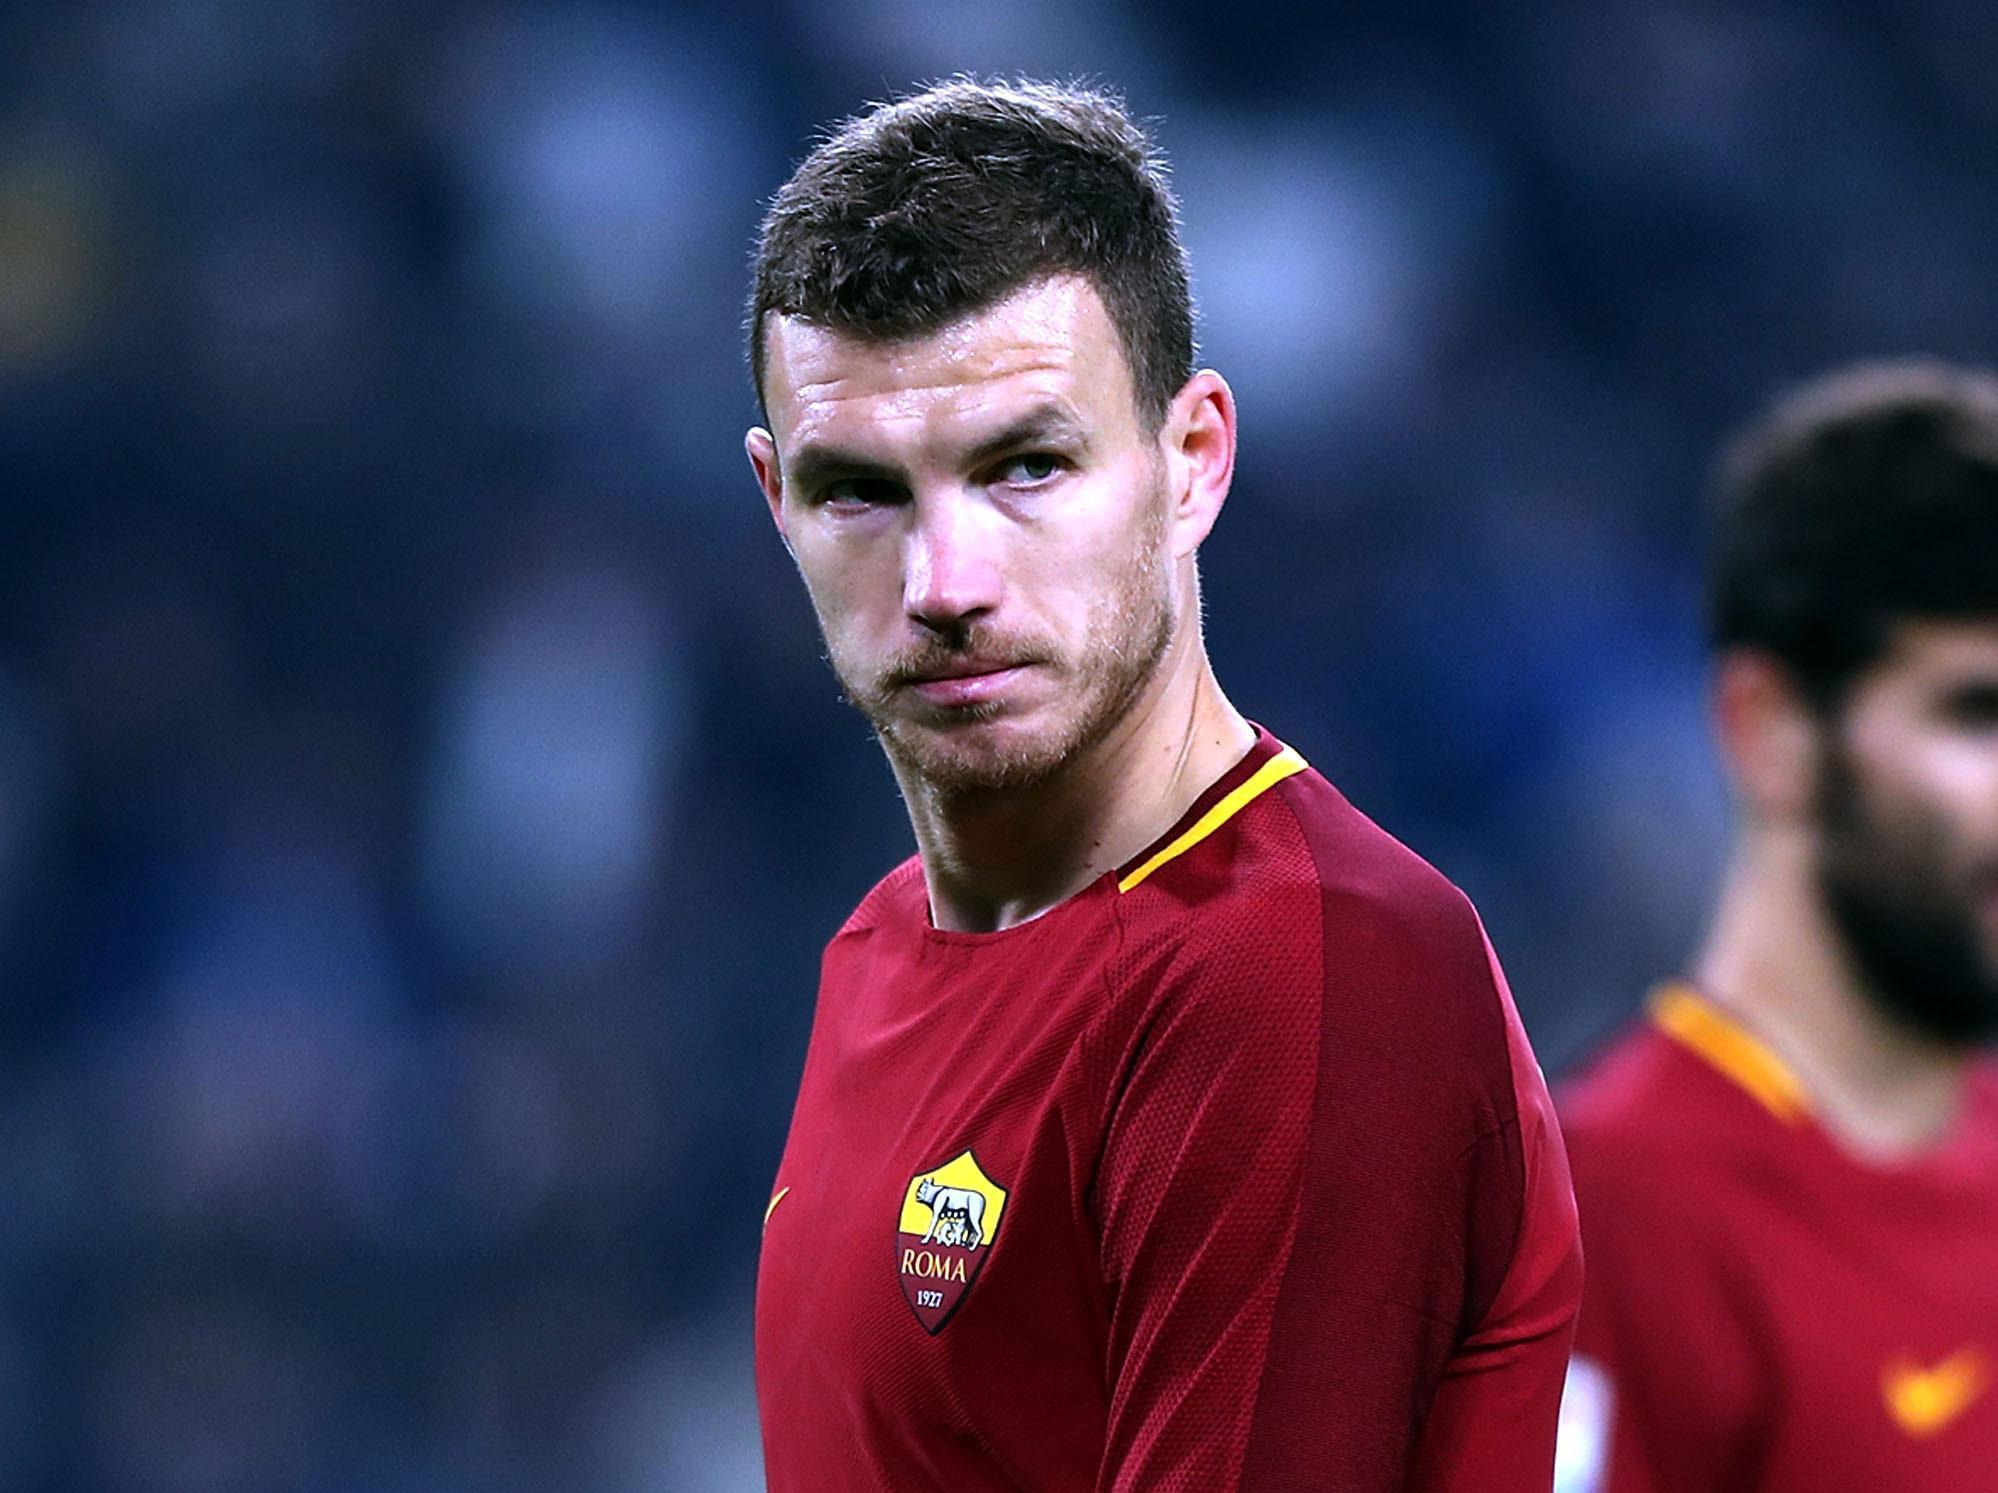 Chelsea want the 31-year-old Roma striker to provide depth